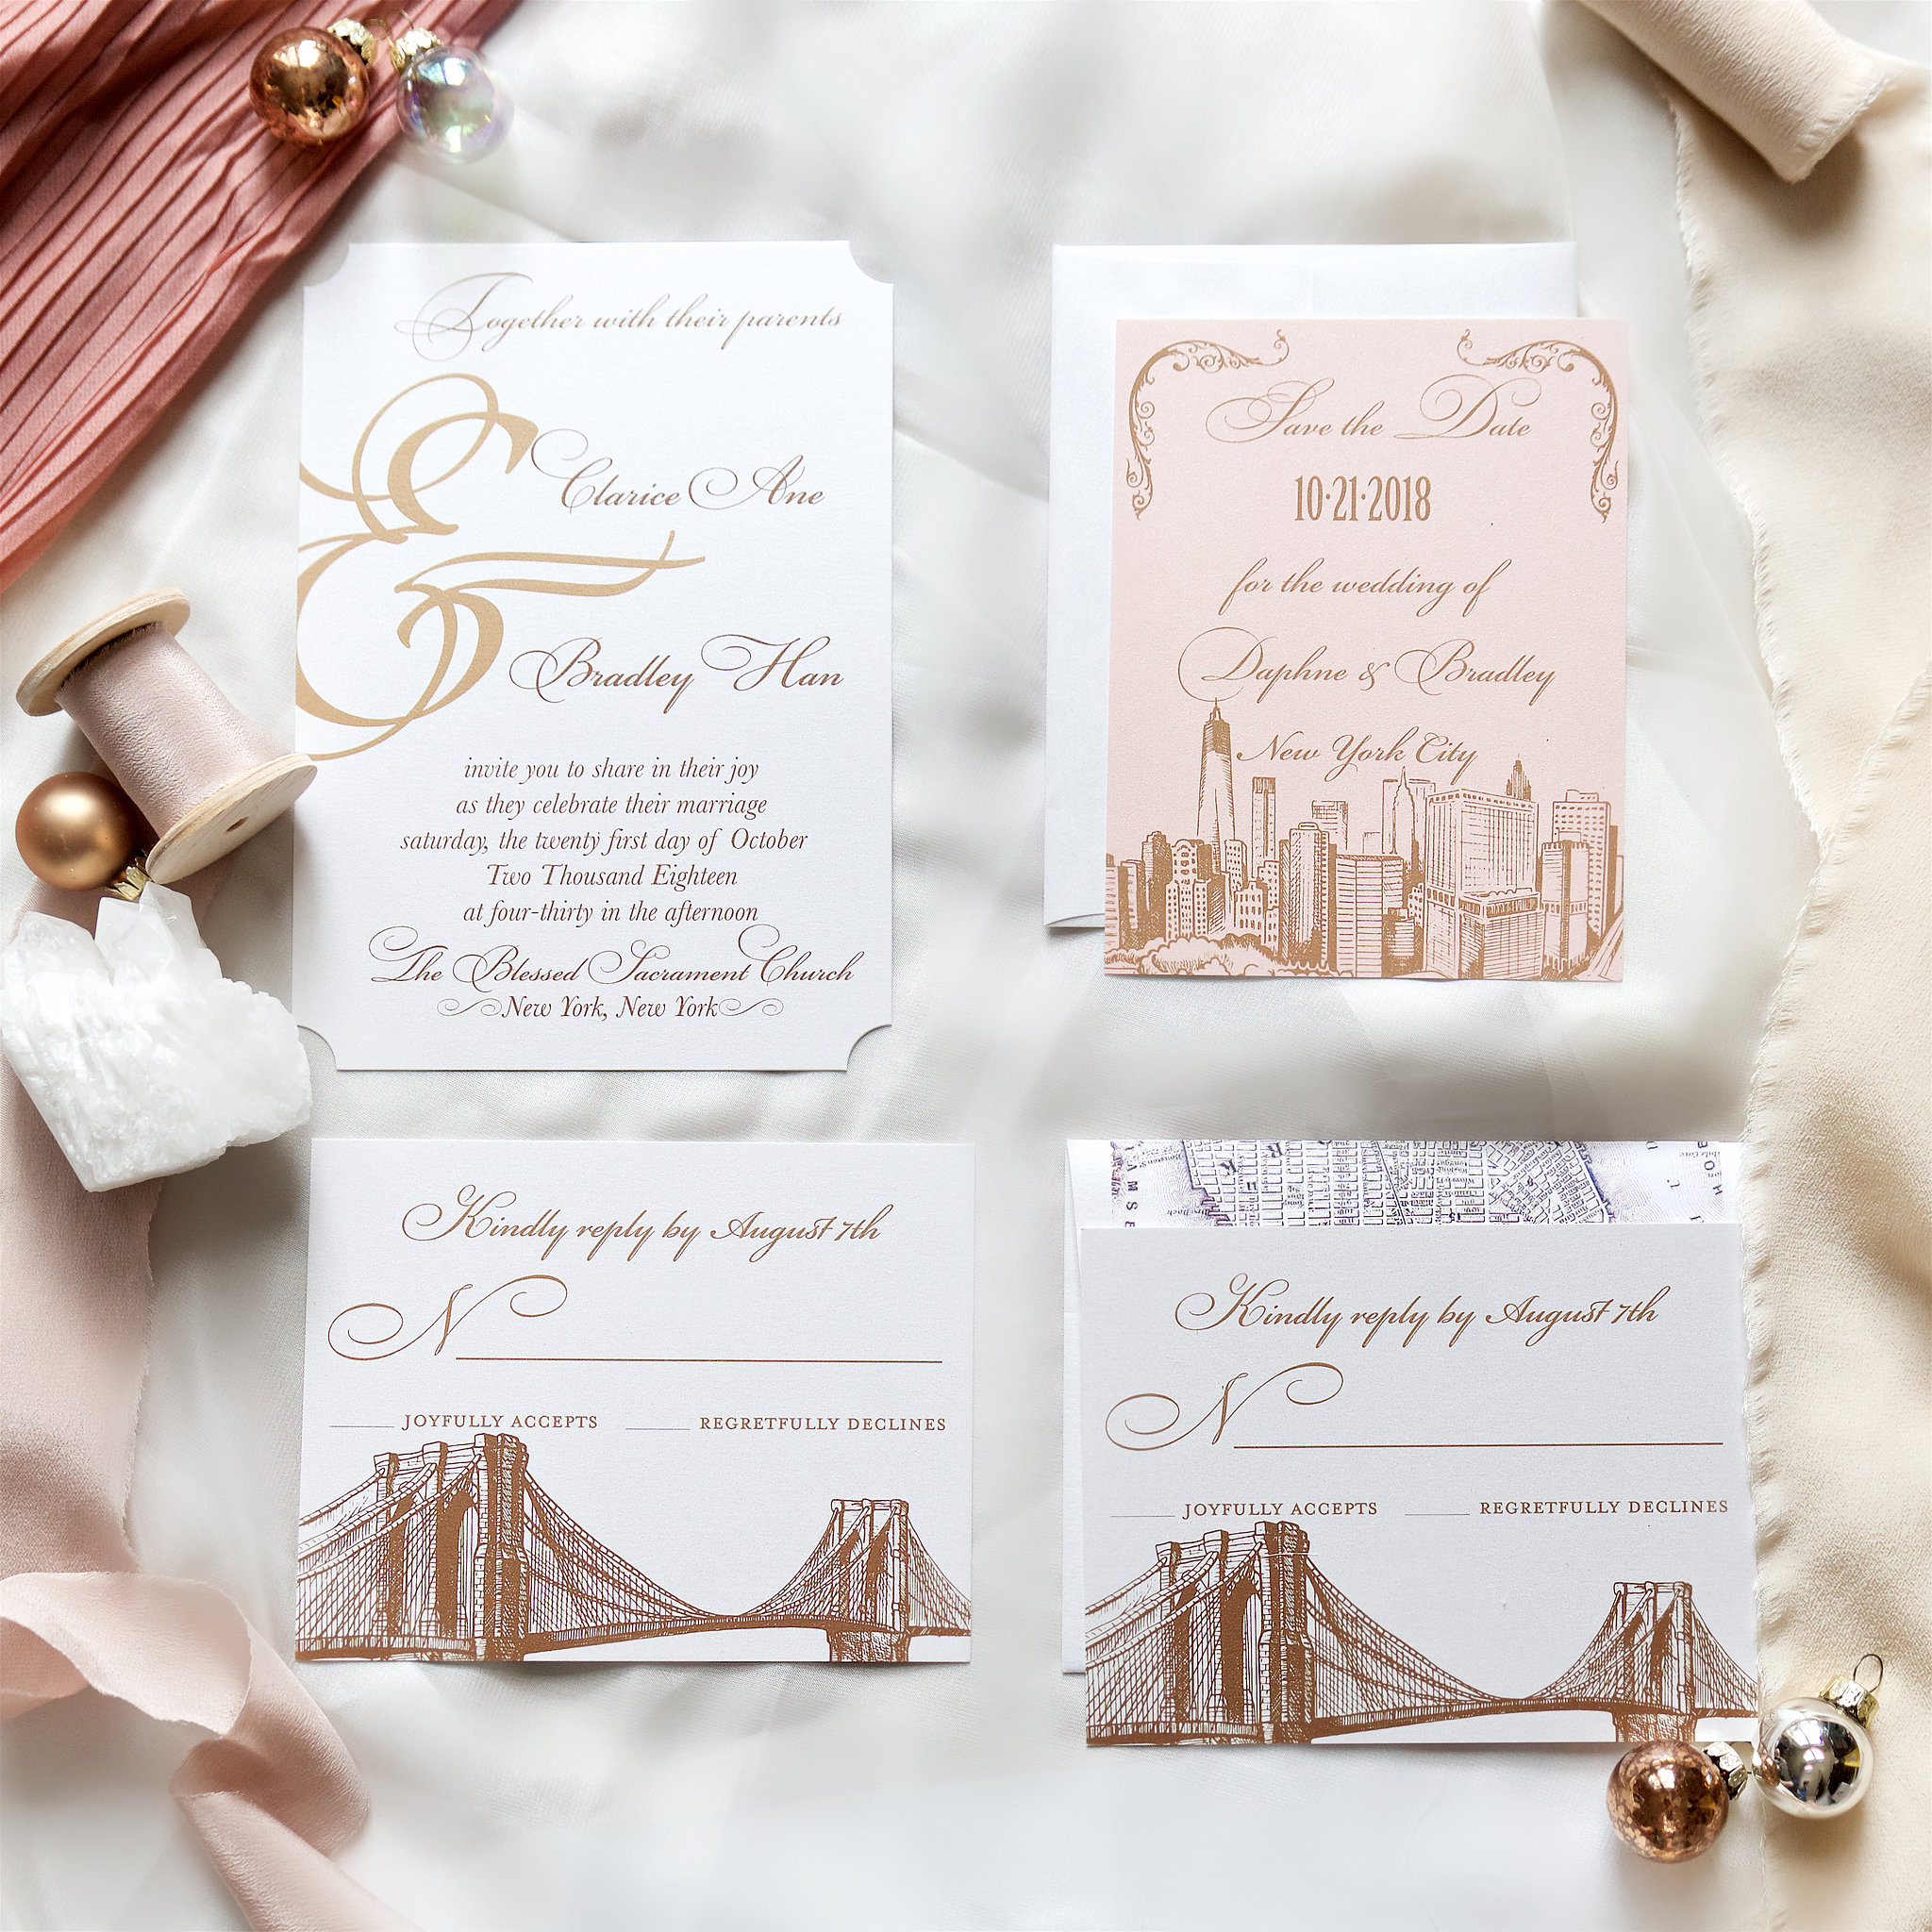 Feminine vintage French flat lay invitation suite with macarons Anthropologie Free People Etsy designer. Branding product photographer Chelsea Loren styling flat lays. Dusty pink New York City modern meets vintage invitation.